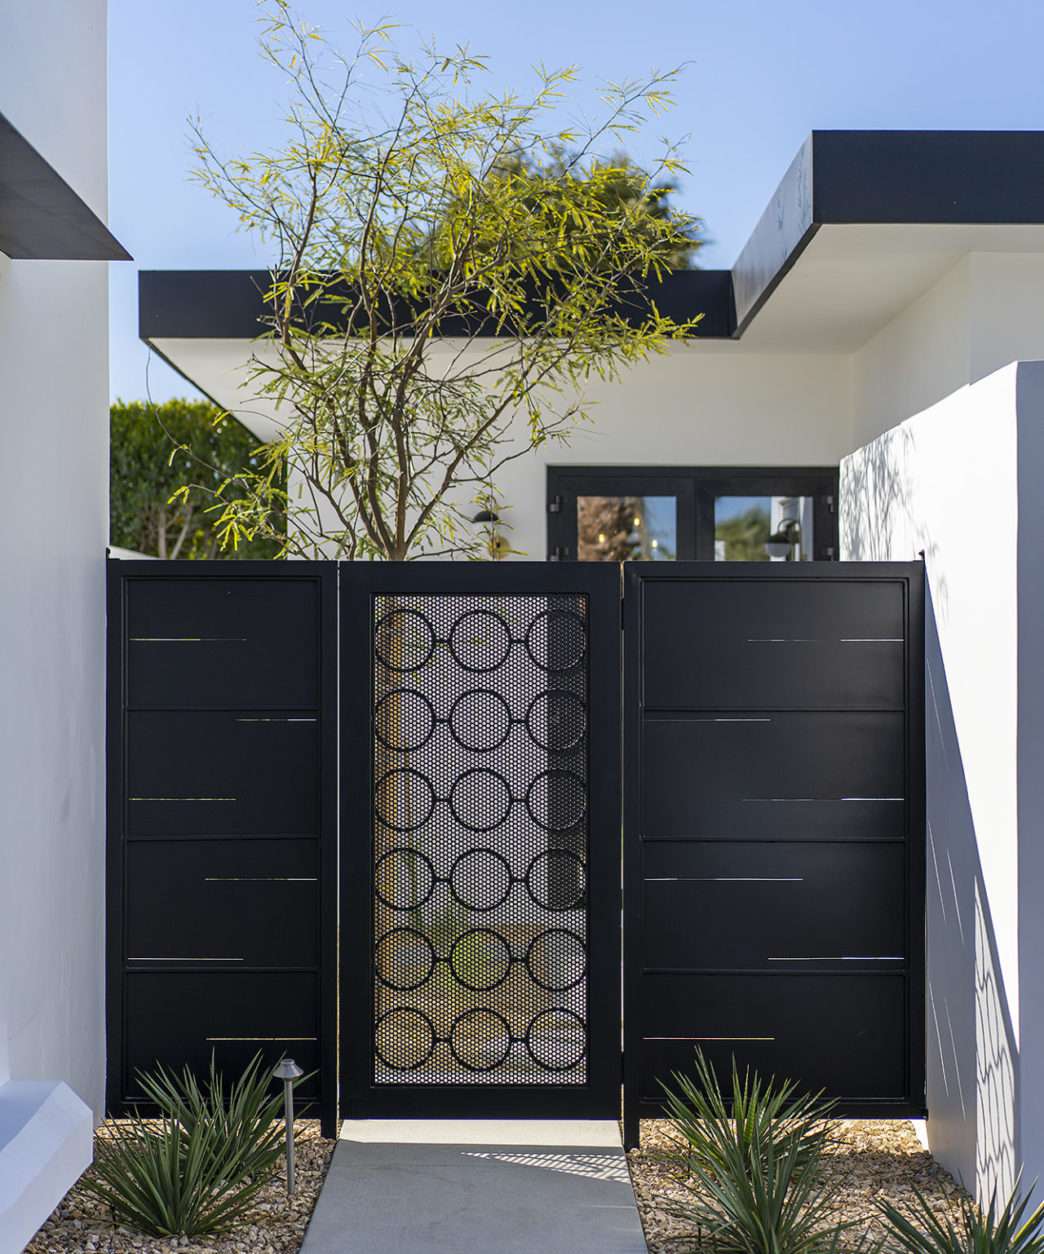 Black and white house with a flat roof and black gate